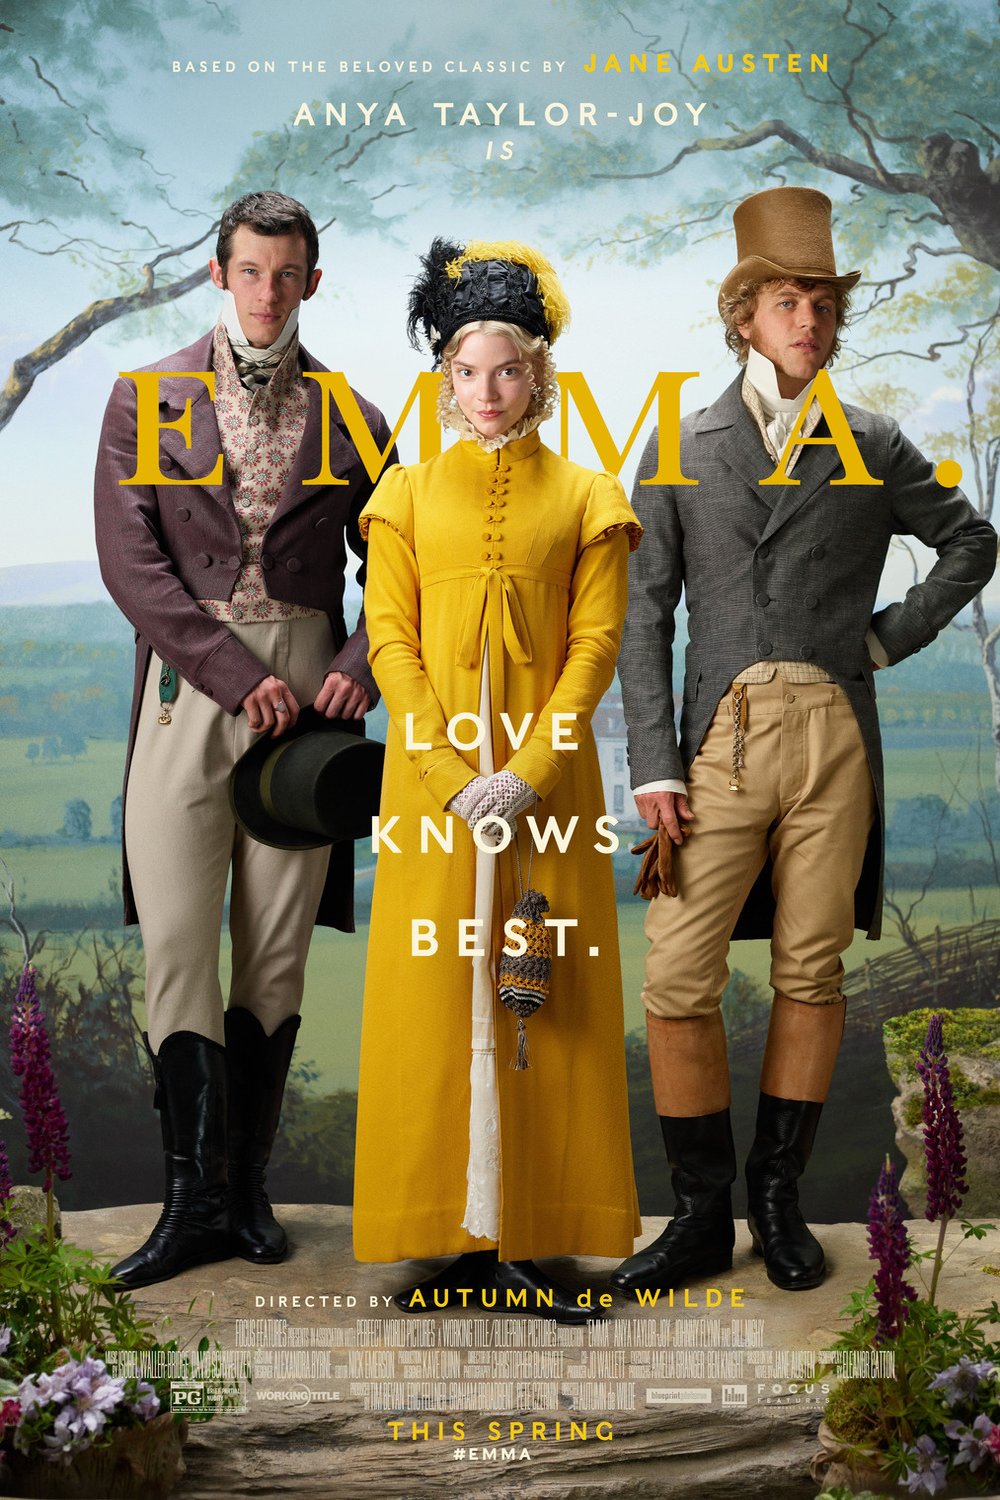 Poster of the movie Emma.